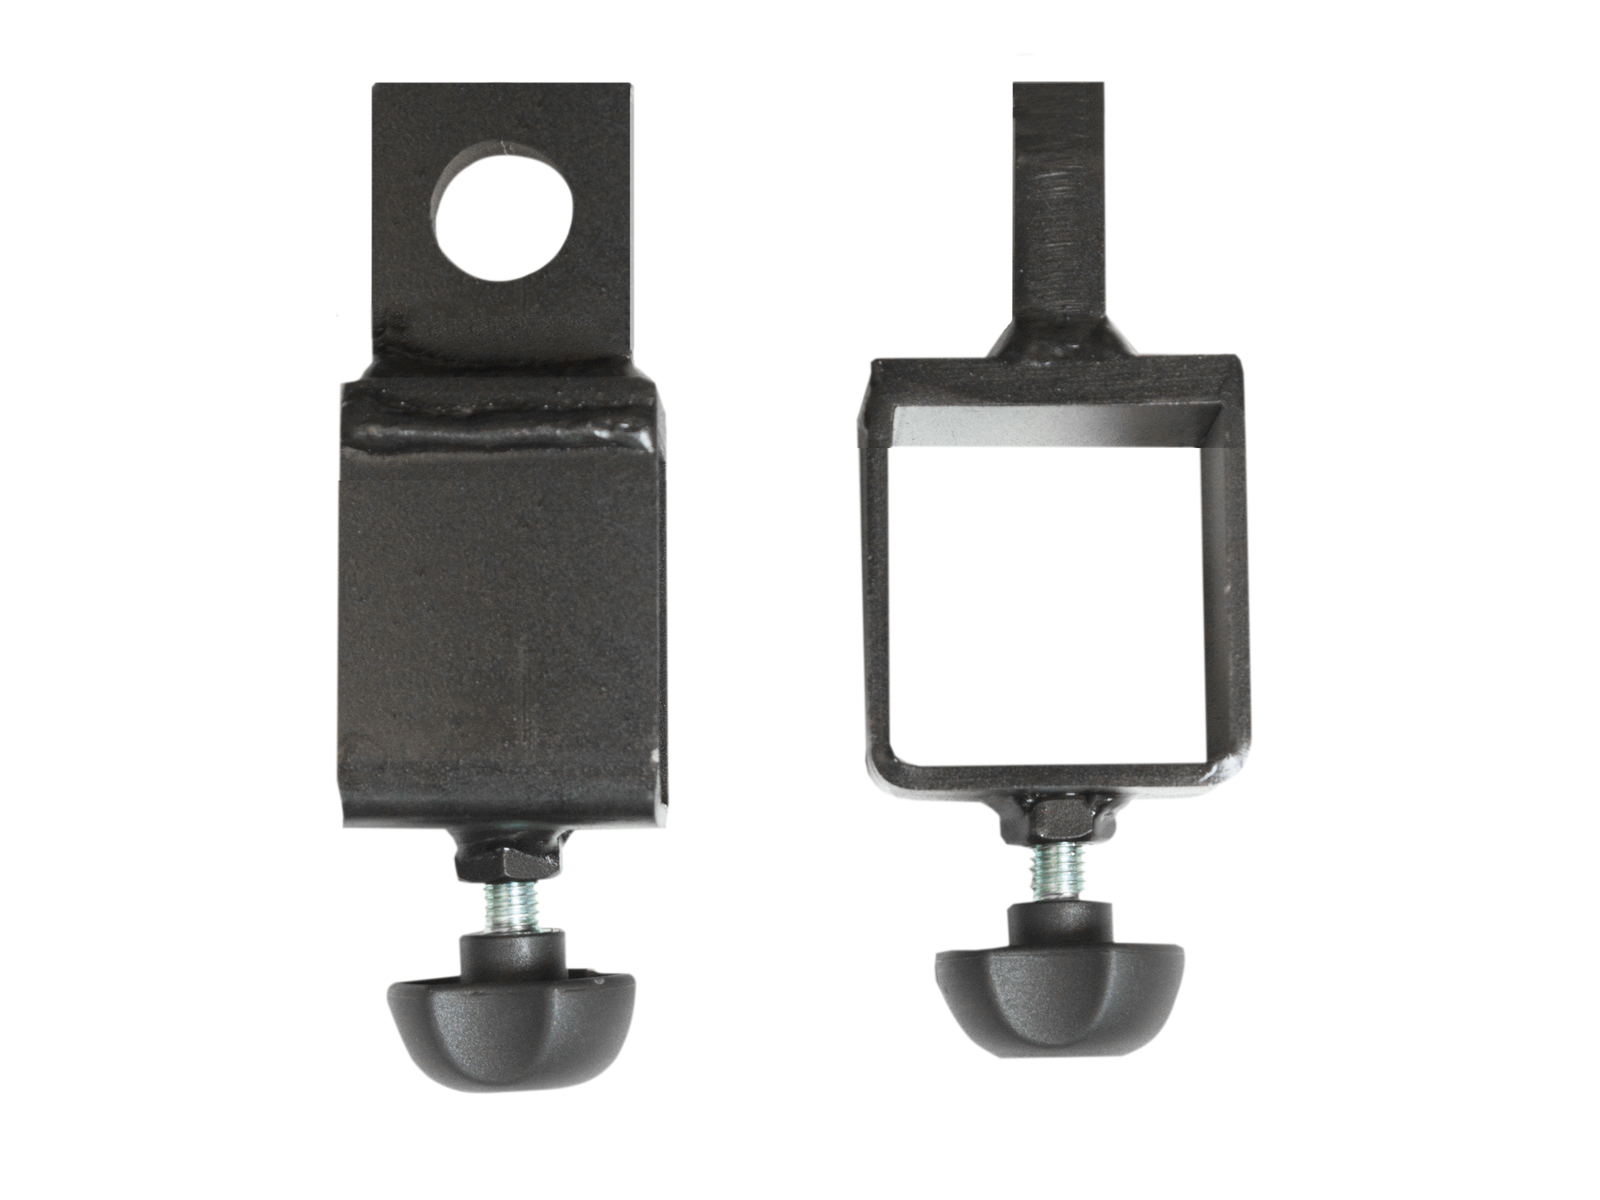 BLOCK AND BLOCK AG-A5 Hakenadapter für Omega Serie (50x50)